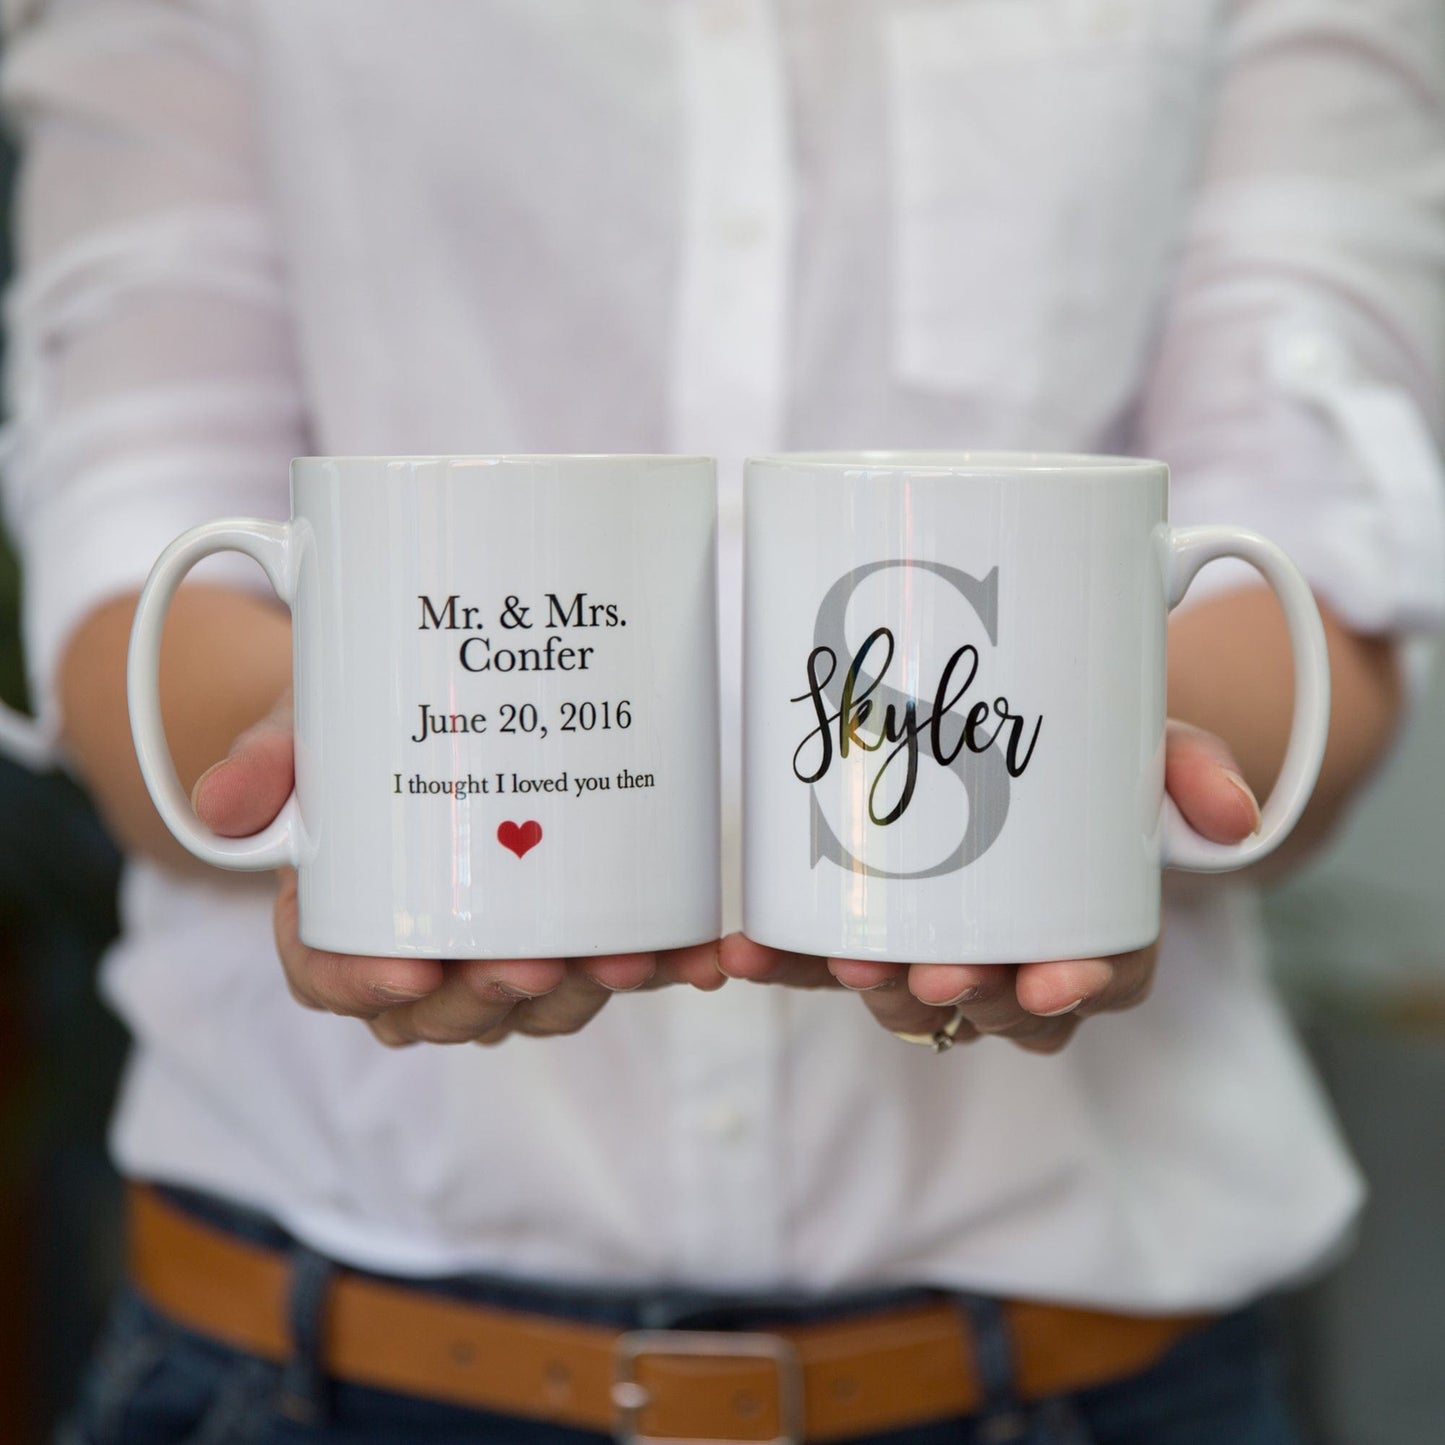 Wedding Gift Mug Set - Any Initials With Personalisation - Great For Couple For Anniversary Or Christmas